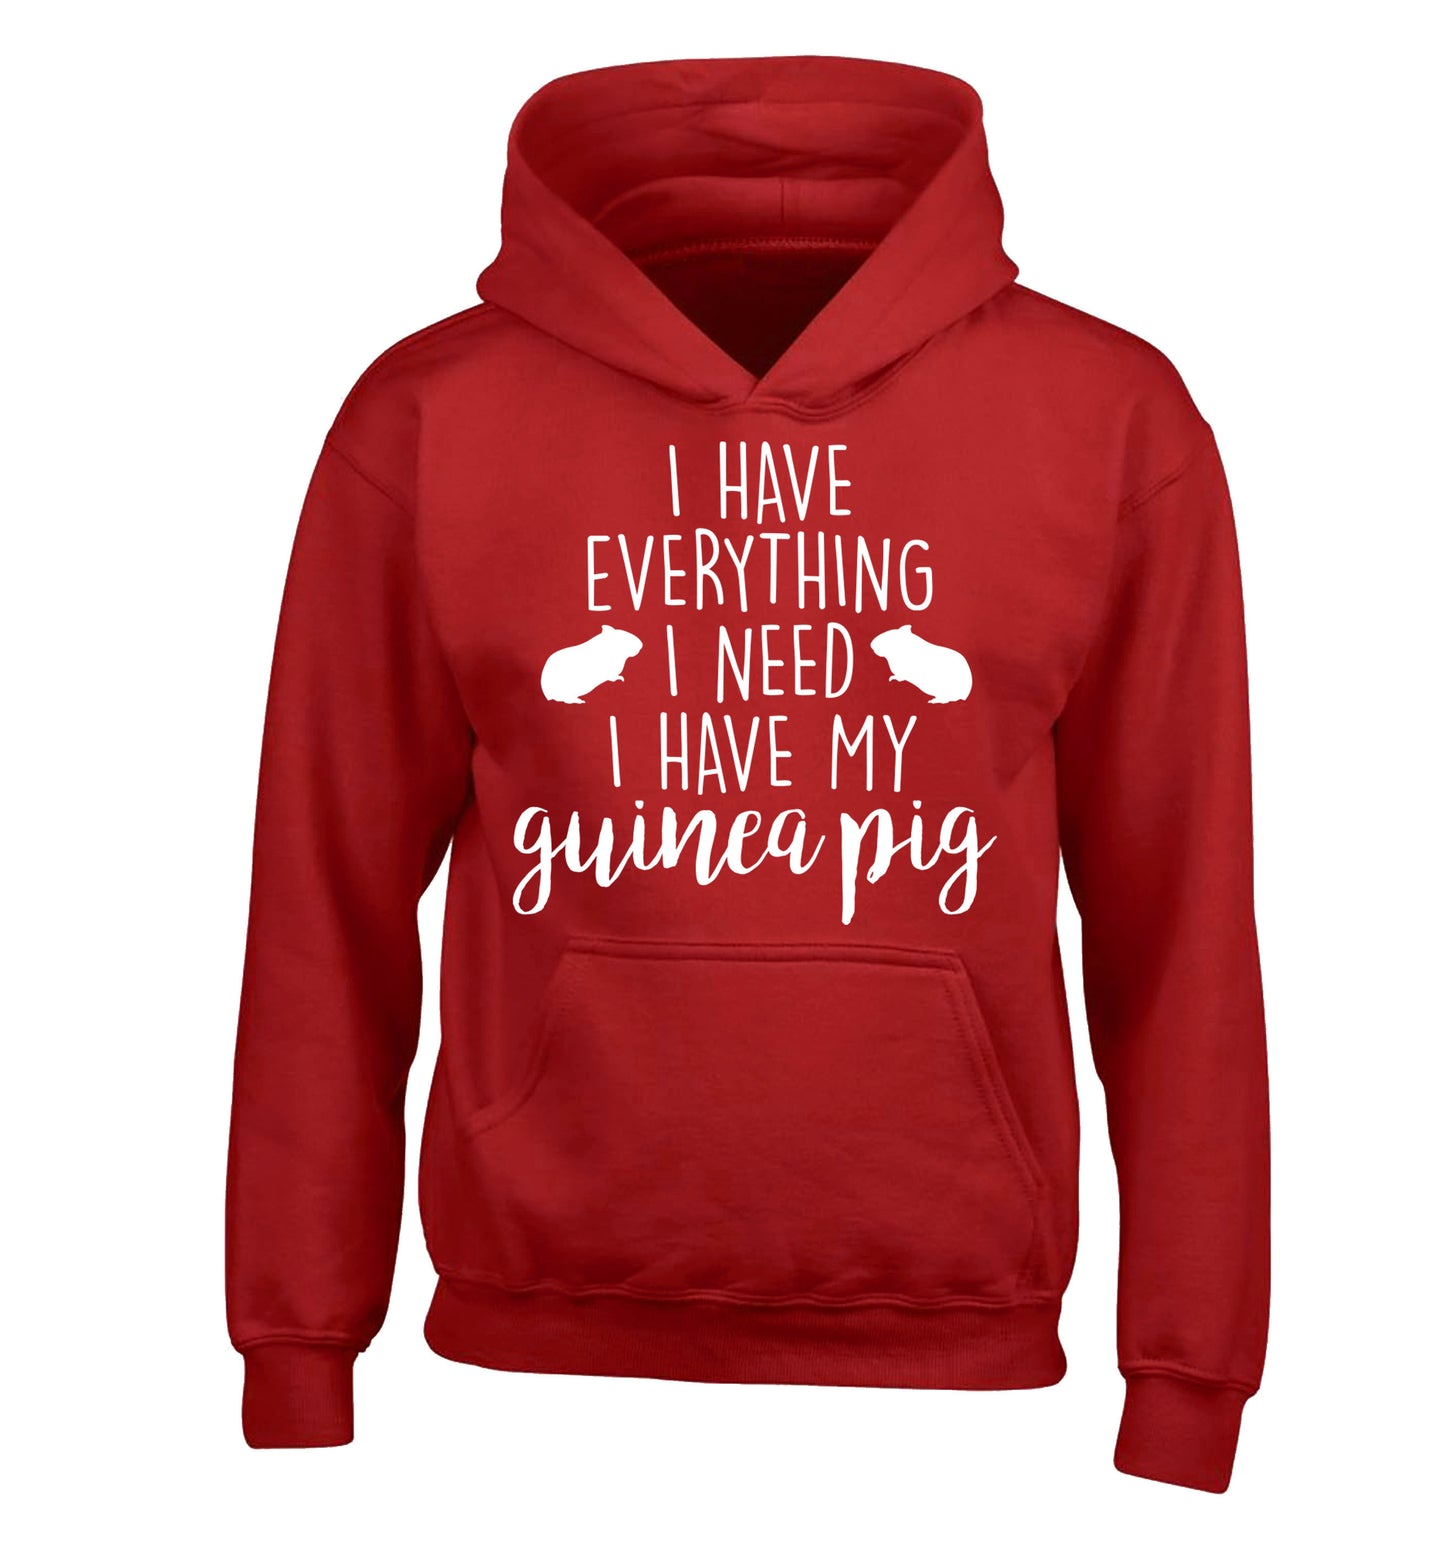 I have everything I need, I have my guinea pig children's red hoodie 12-14 Years